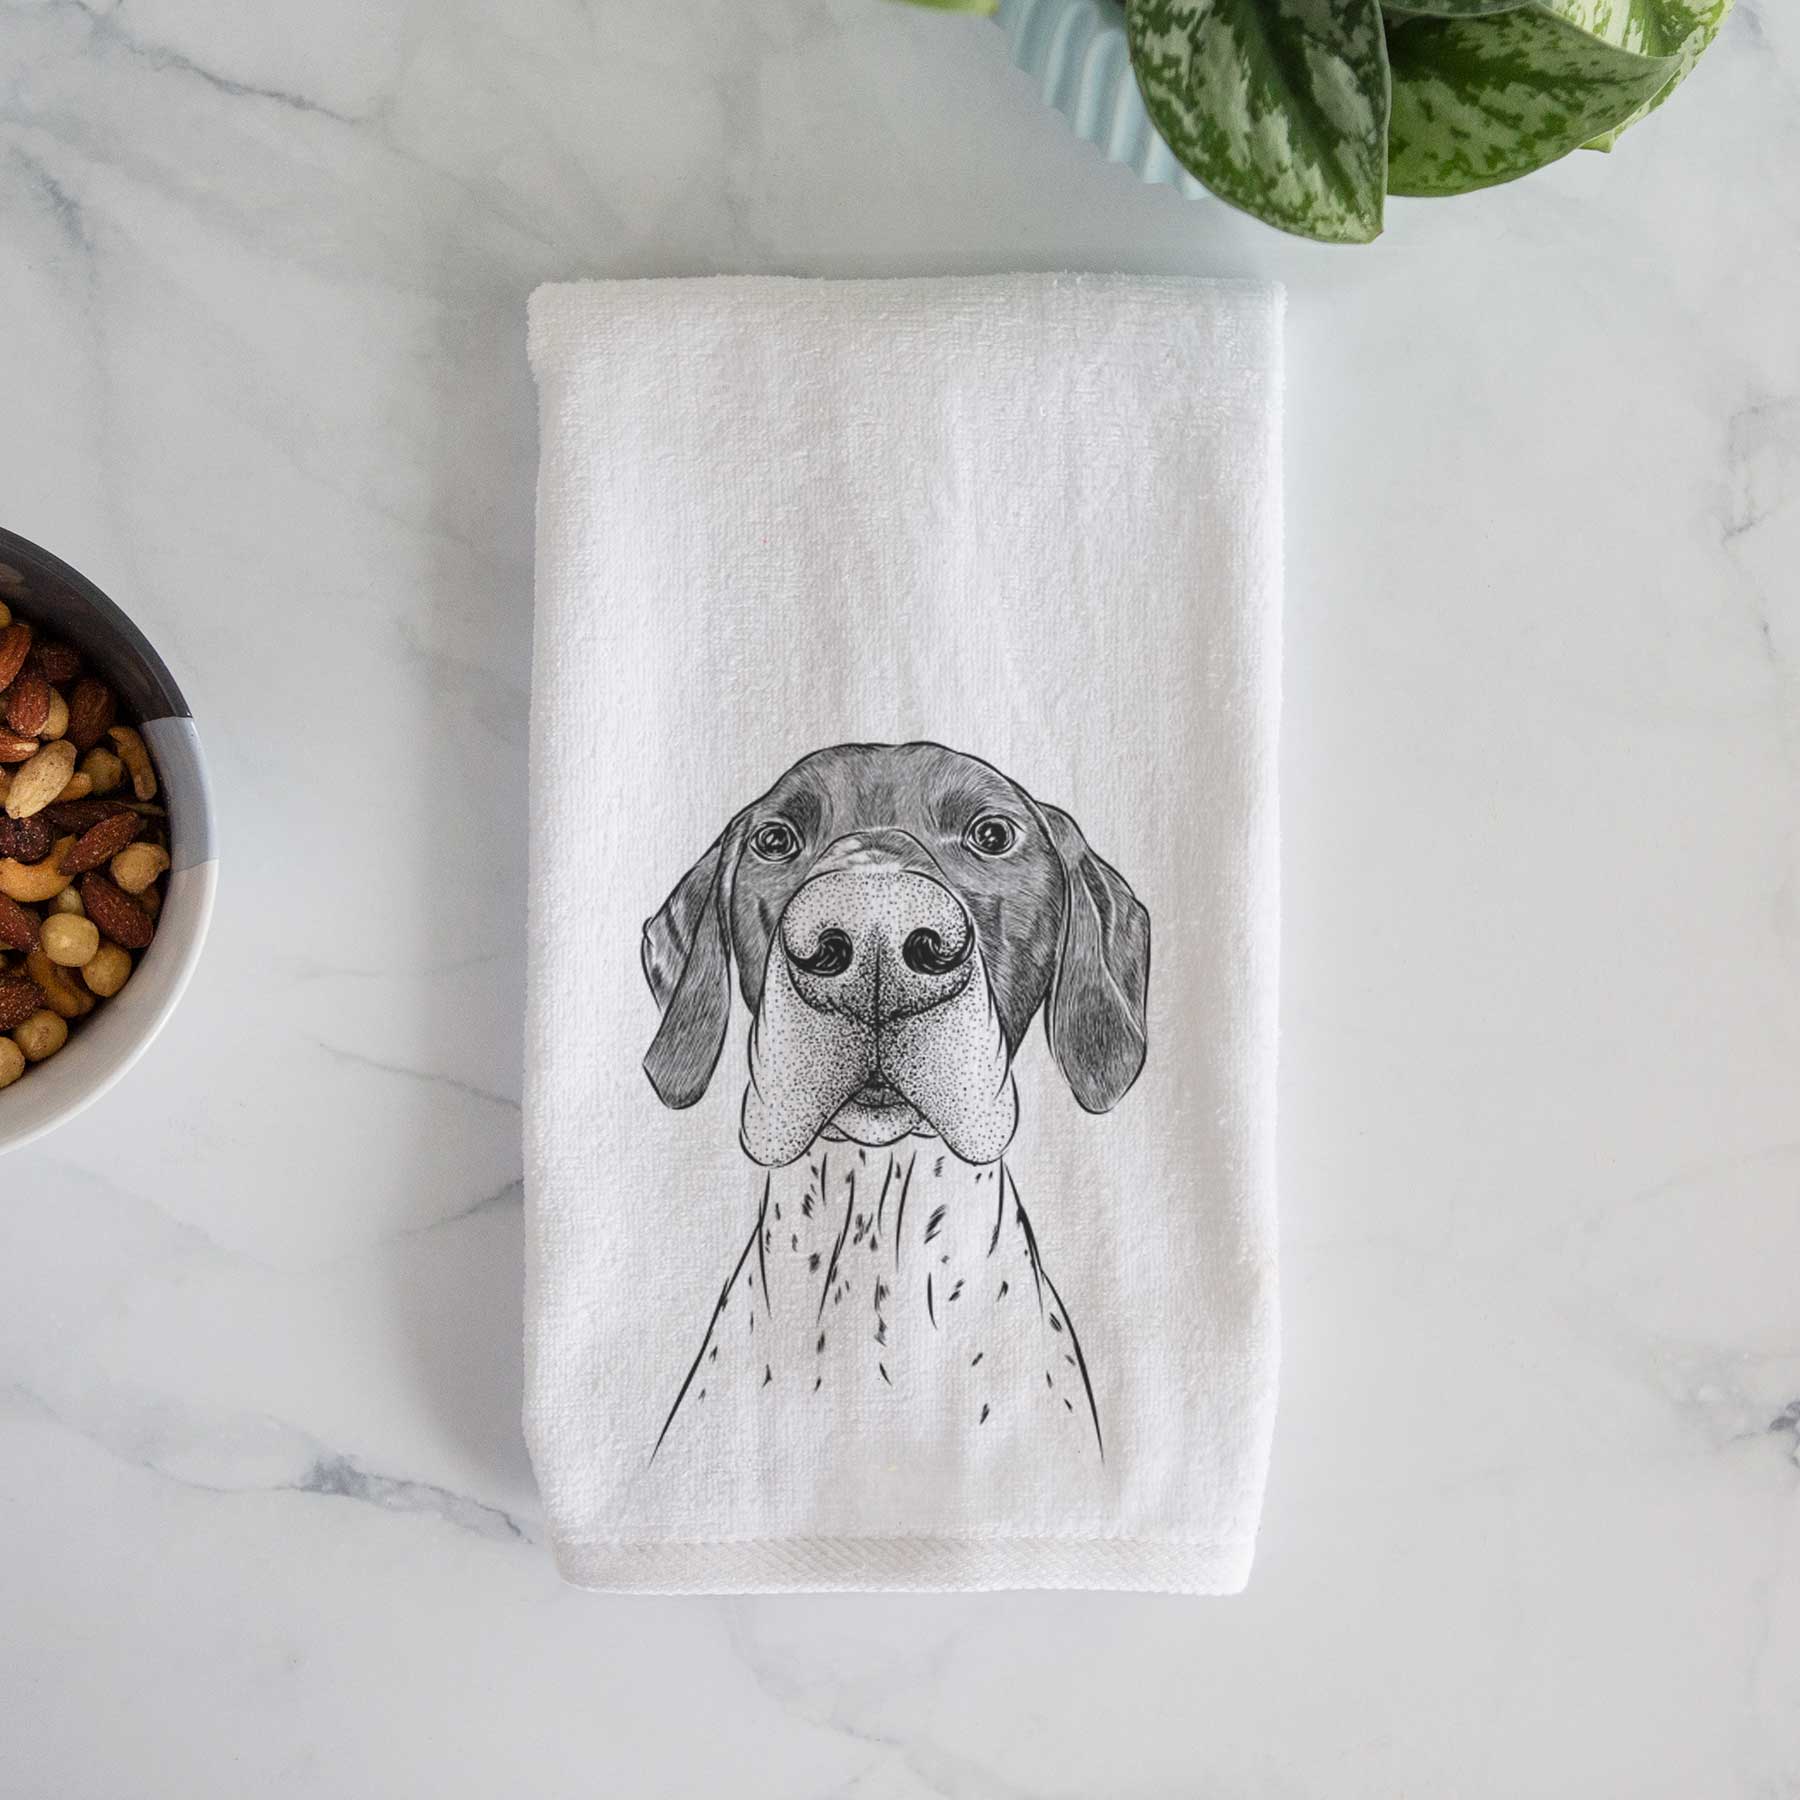 Booze the German Shorthaired Pointer Hand Towel